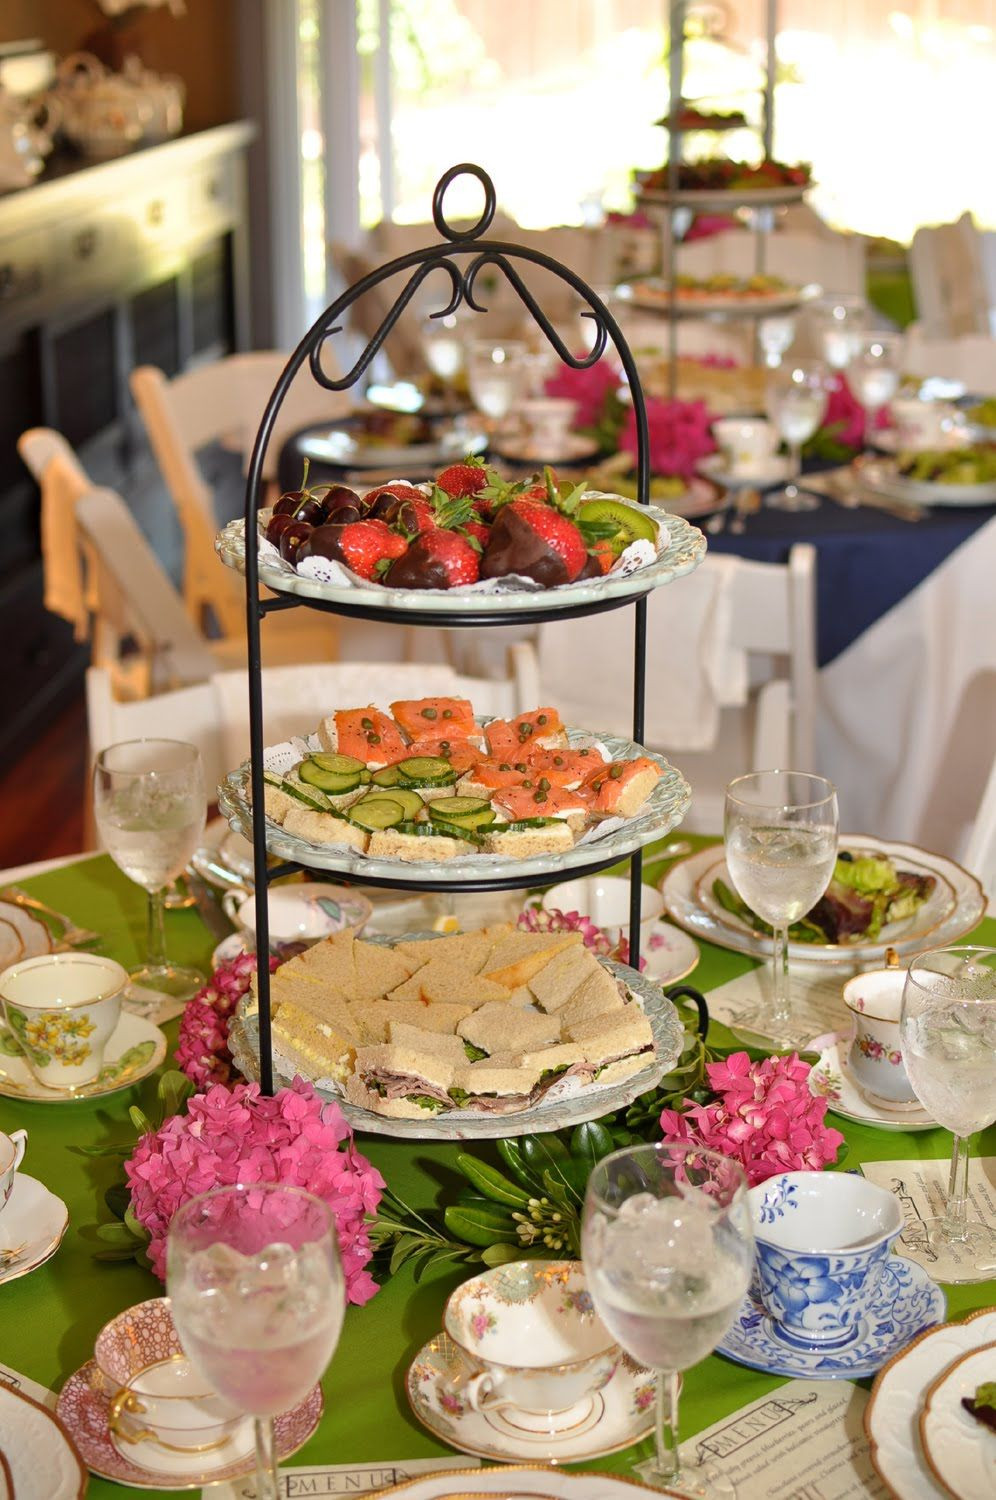 Food Ideas For Tea Party Bridal Shower
 Lisa is Bossy This is how we do it